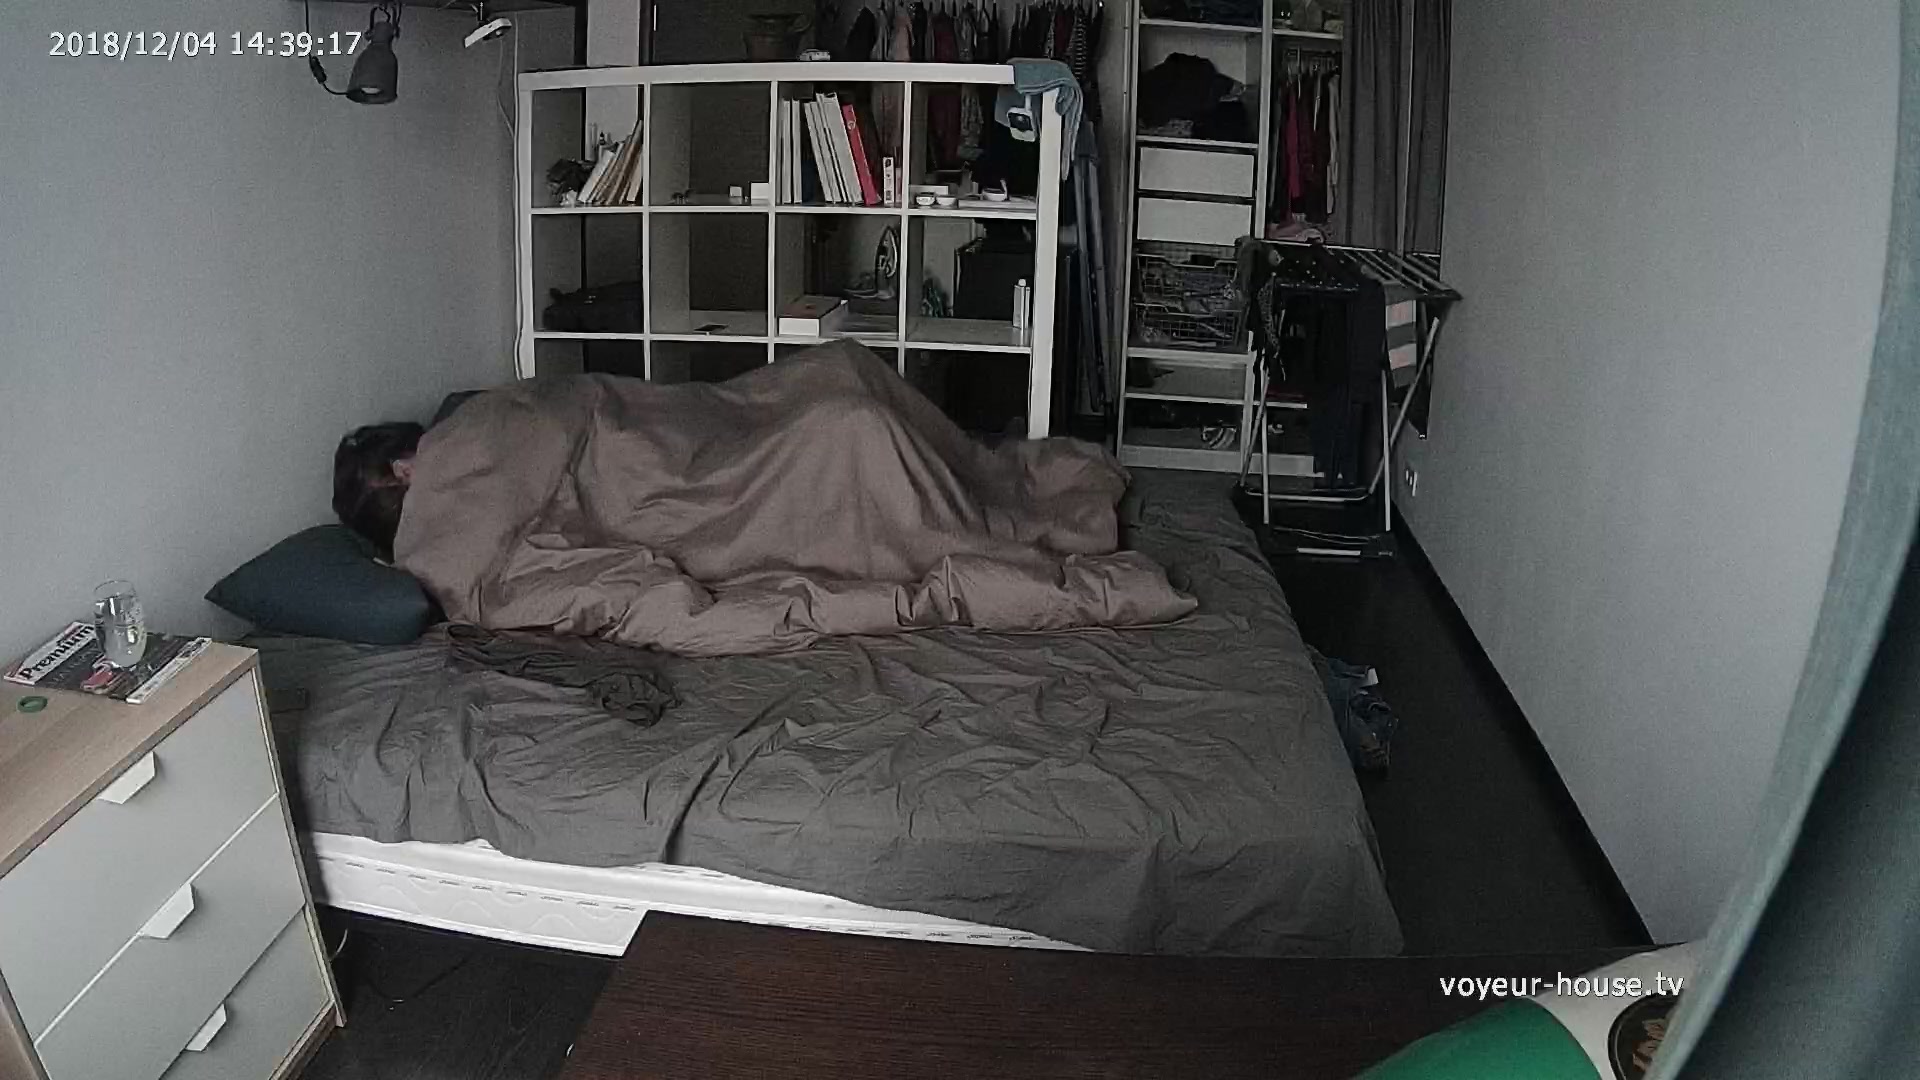 Aroused roommate sneakily fucks chick under blanket picture